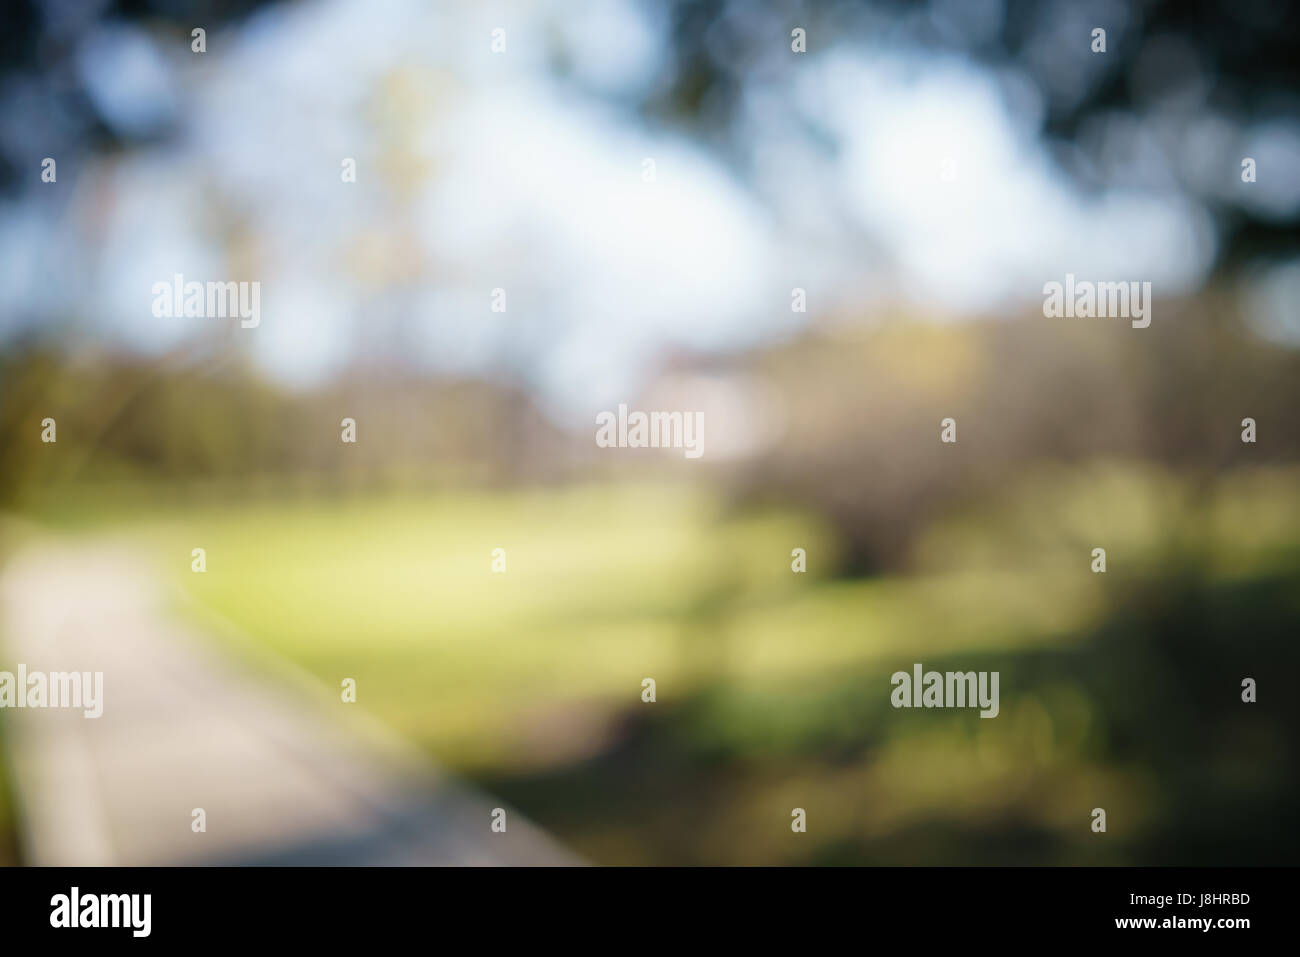 abstract green park or garden blurred background Stock Photo